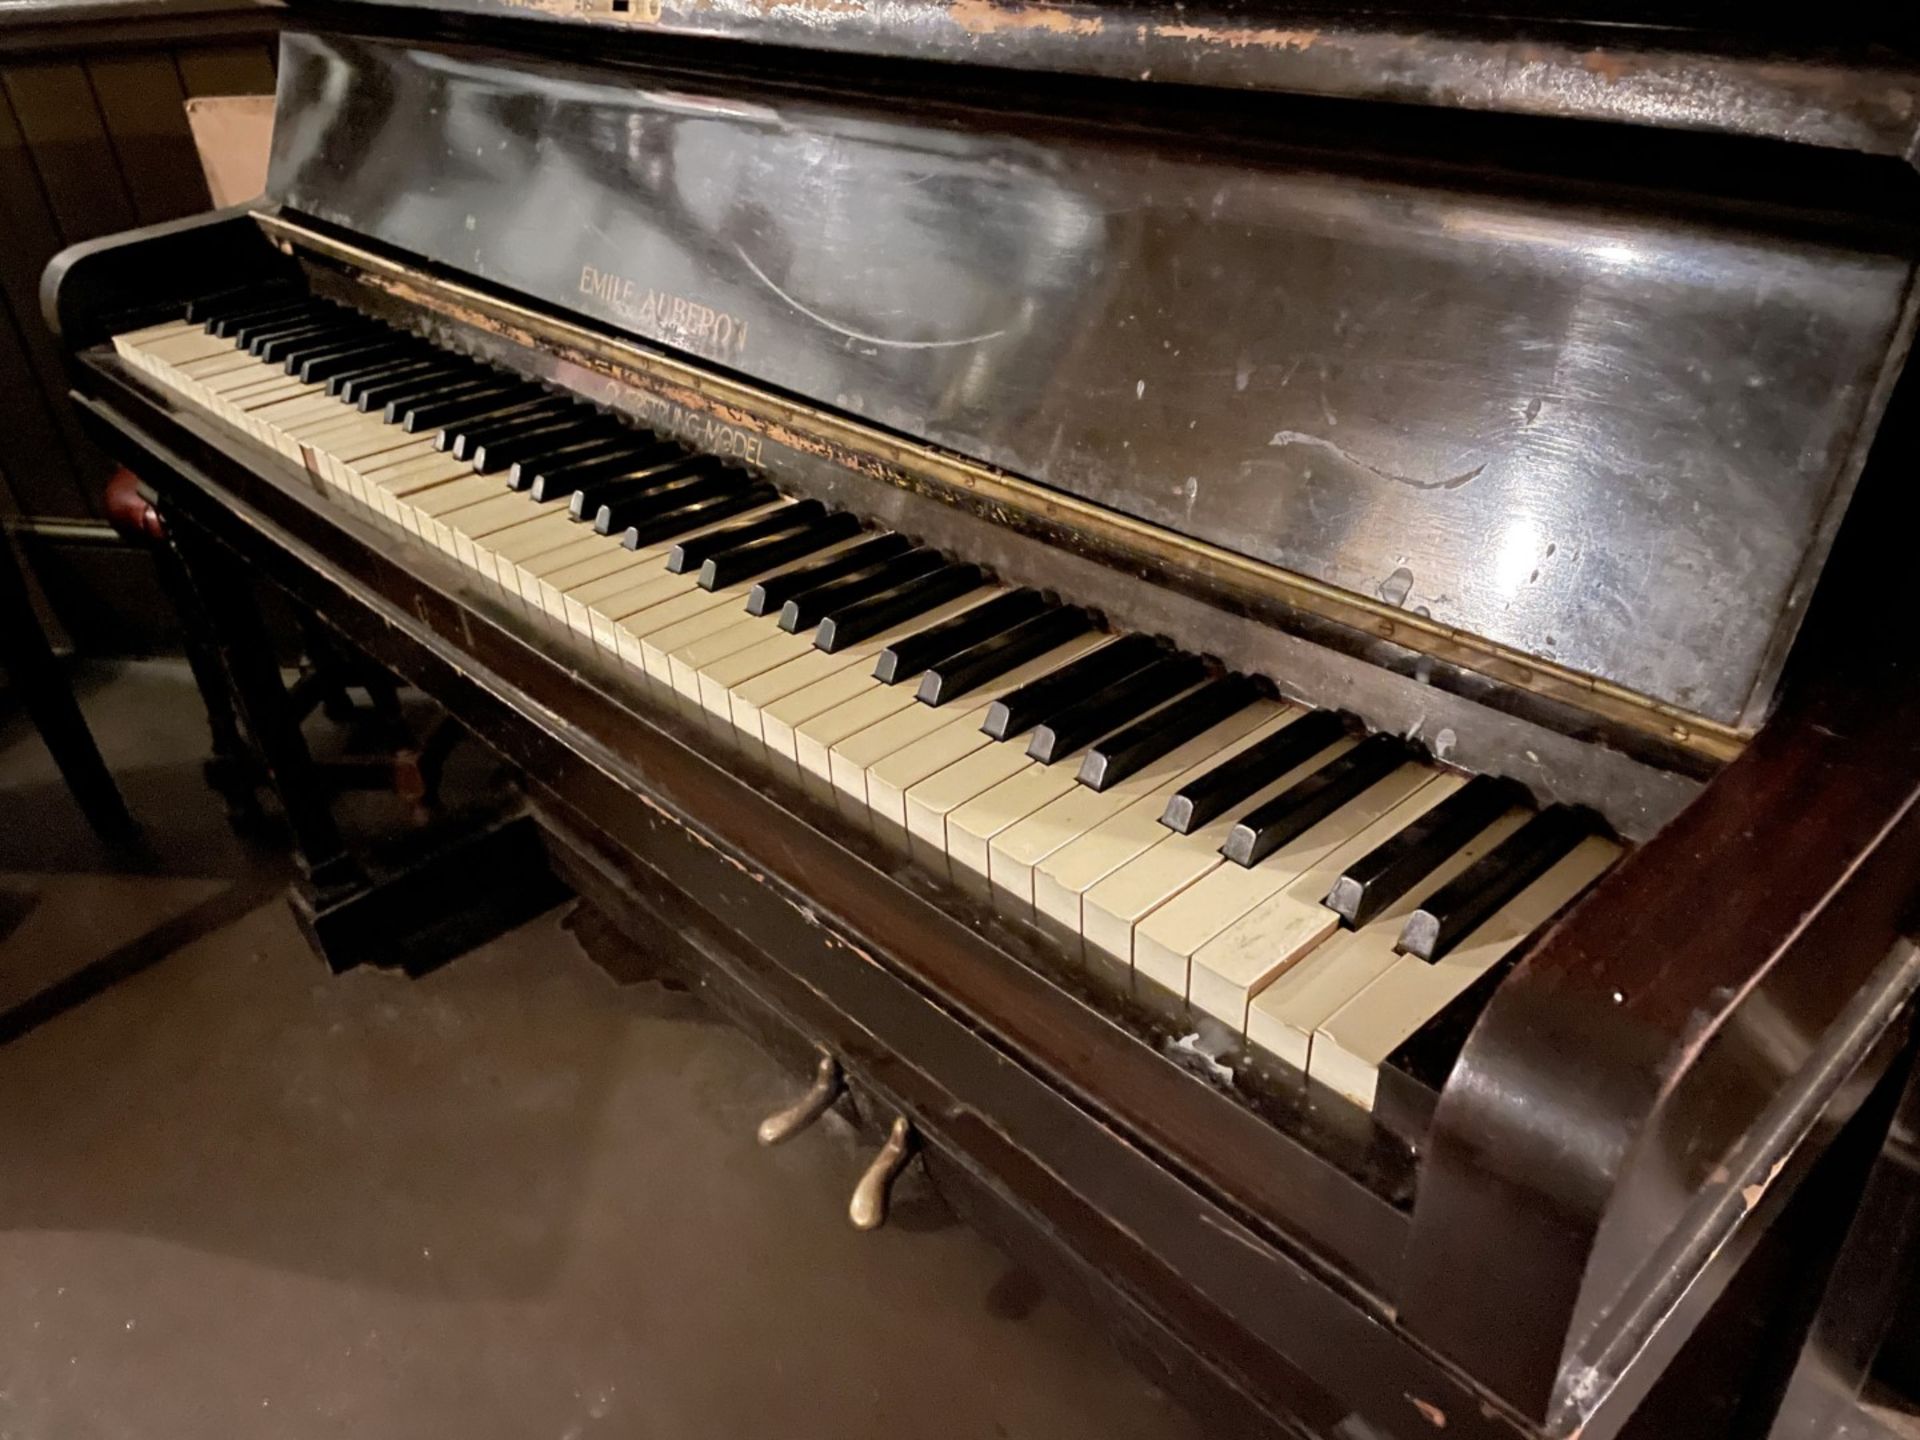 1 x Vintage EMILE AUBERON Mahogany Overstrung Upright Piano - Ref: 123 - CL909 - Location: London, - Image 10 of 13